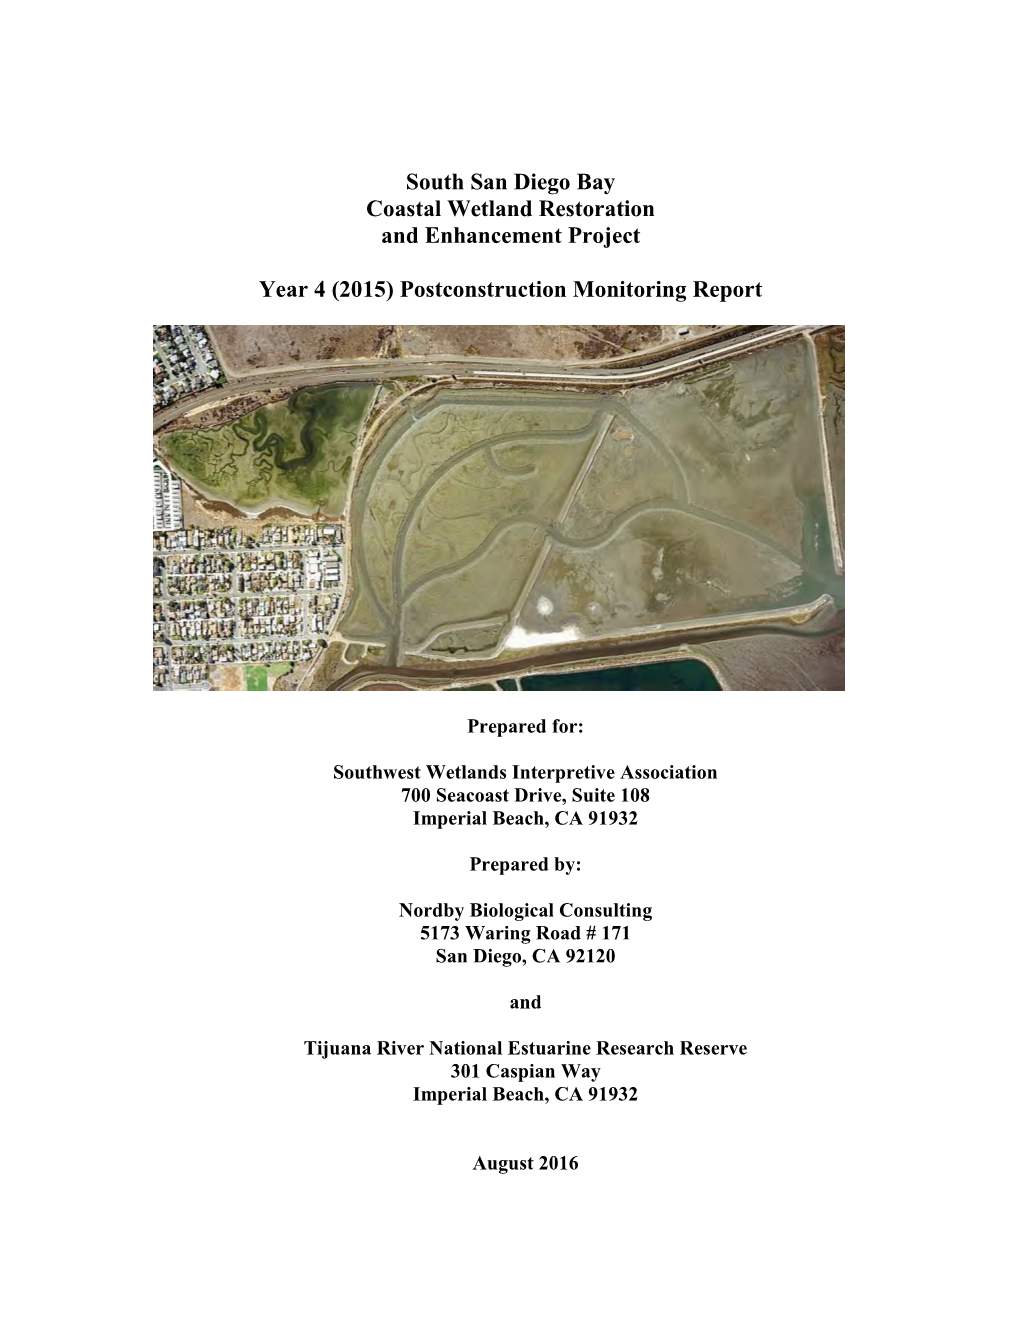 South San Diego Bay Coastal Wetland Restoration and Enhancement Project Year 4 (2015) Postconstruction Monitoring Report